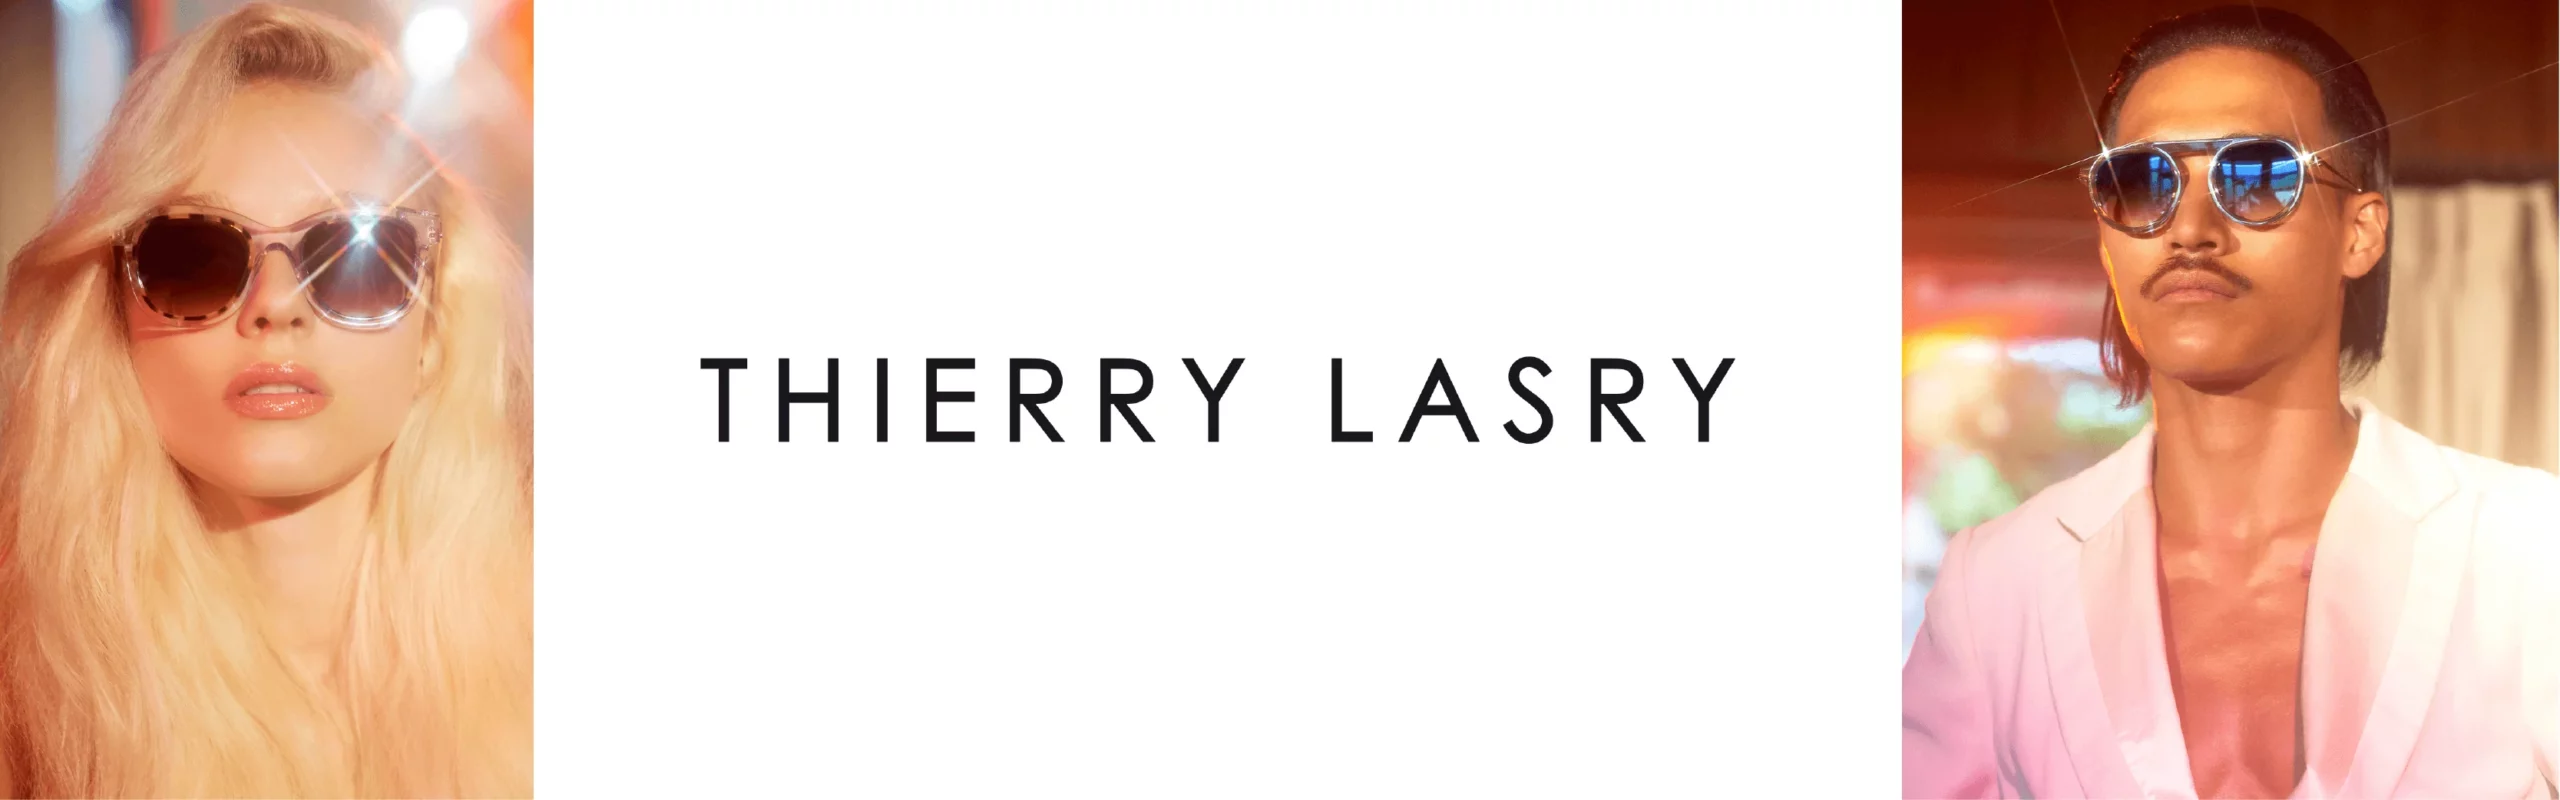 thierry_lasry-01